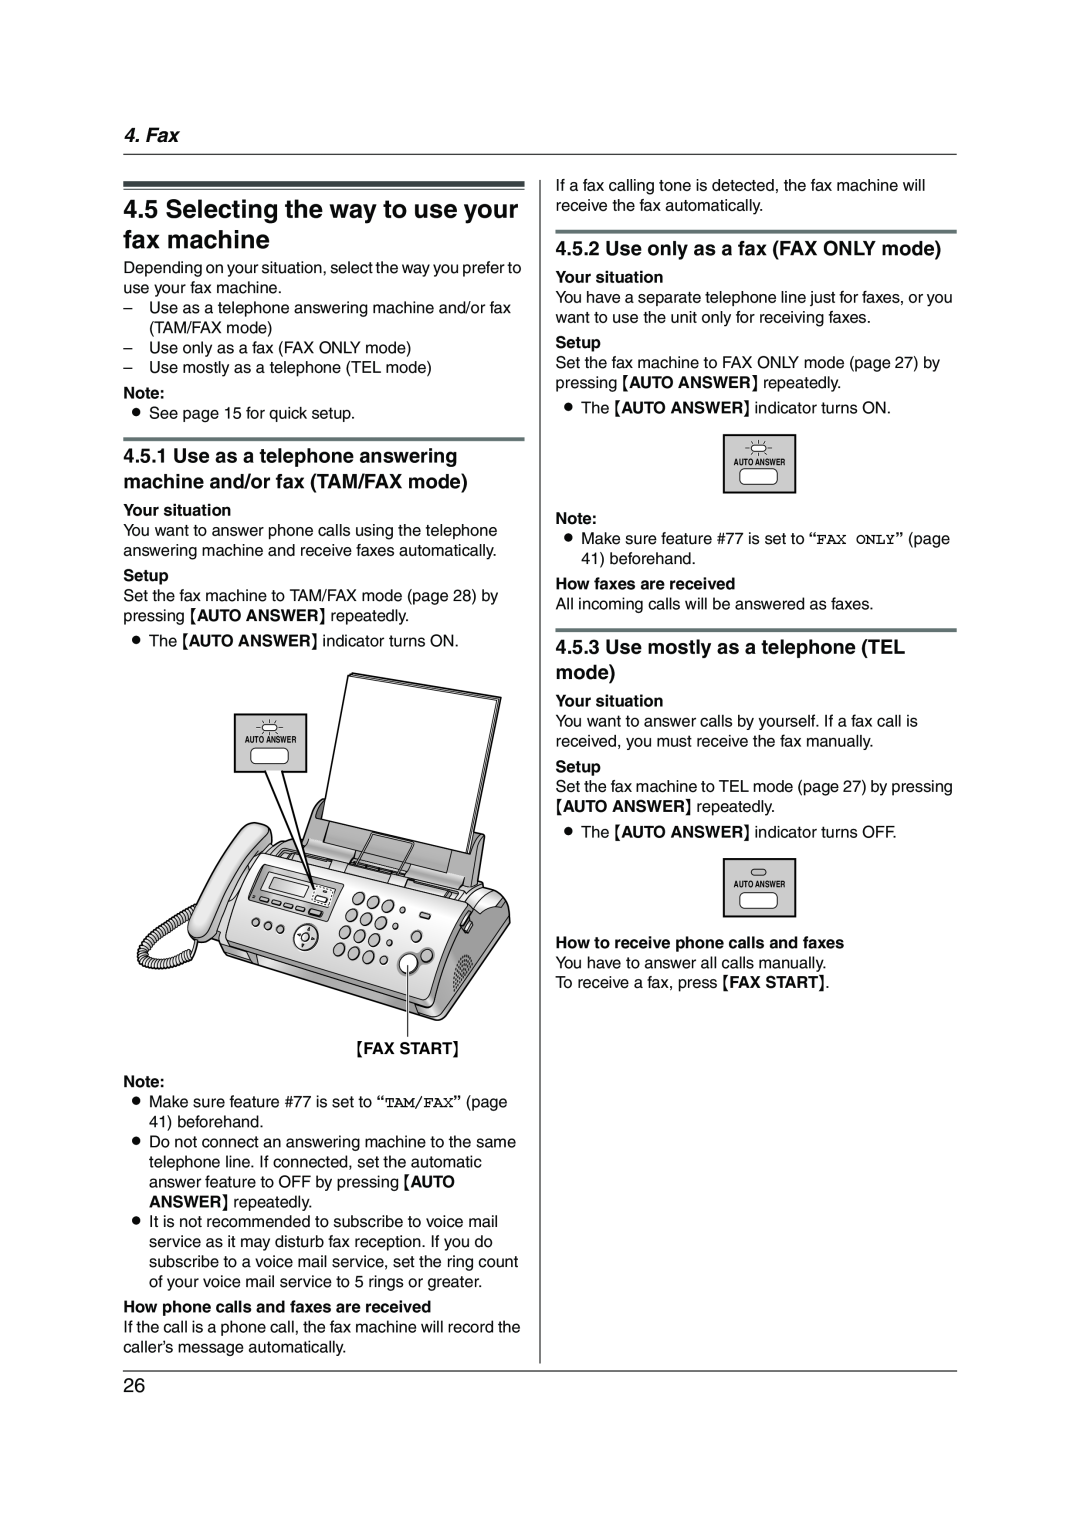 Panasonic KX-FP215 operating instructions Selecting the way to use your fax machine, Fax, Use only as a fax FAX ONLY mode 